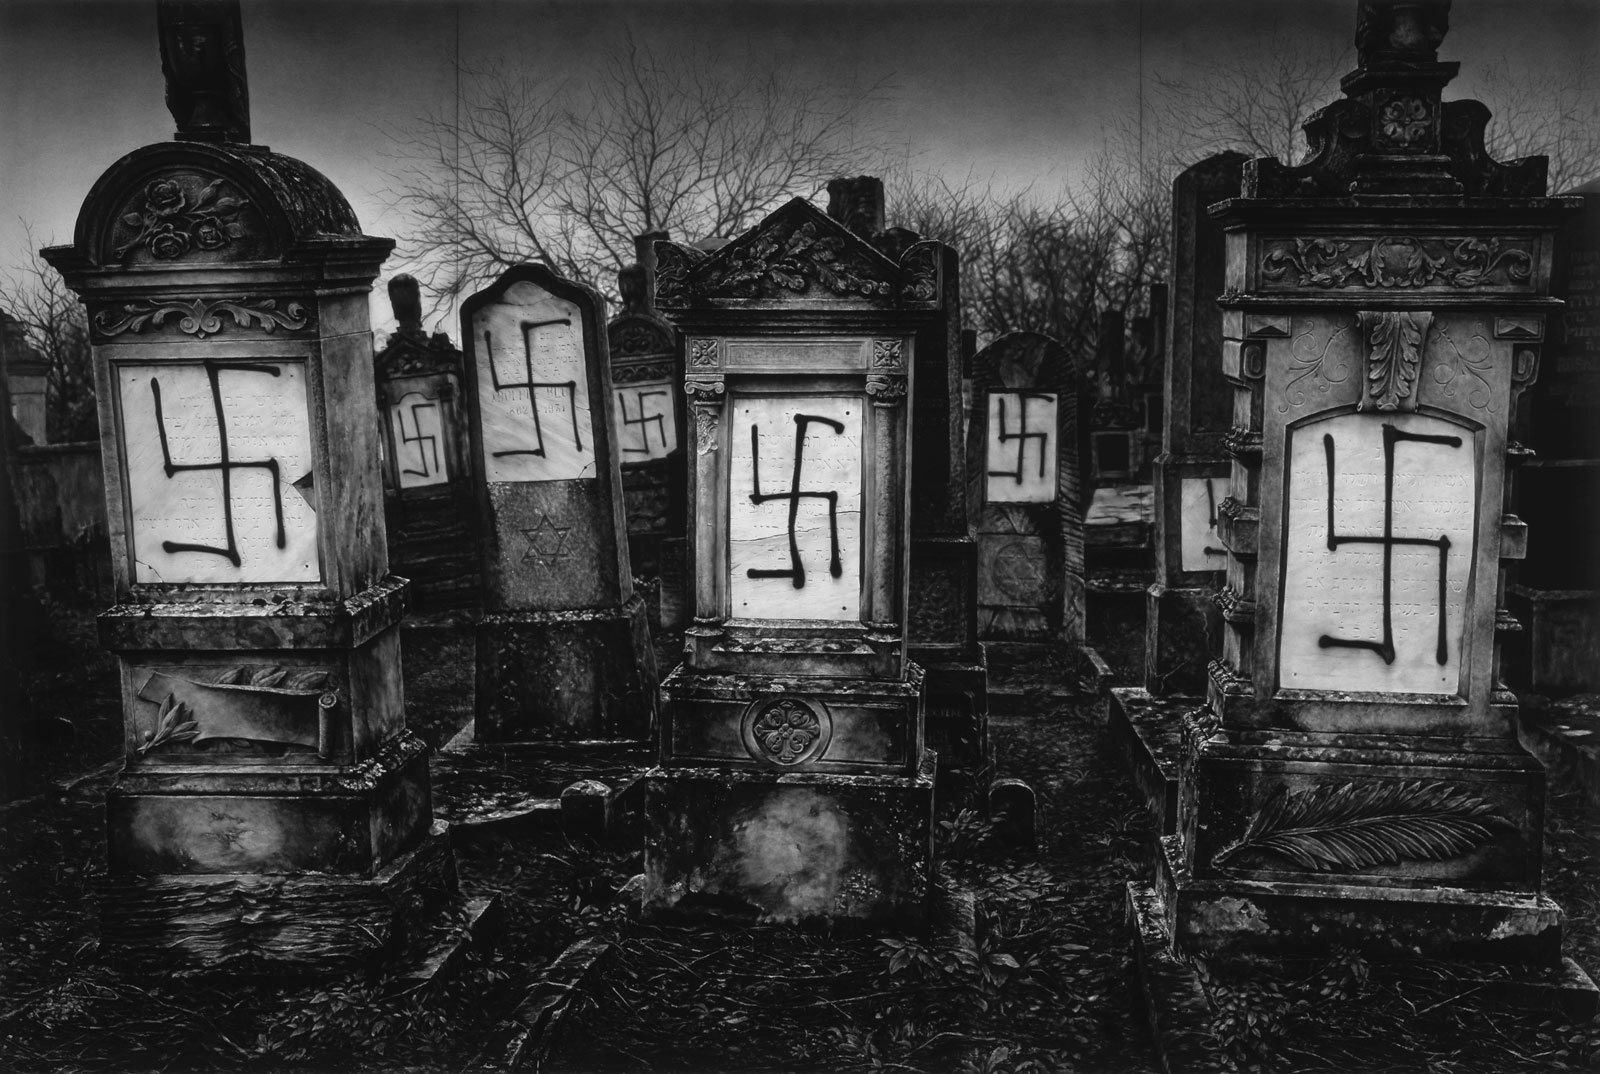 Untitled (Defaced Jewish Cemetery;&nbsp;Strasbourg, France; December 14,&nbsp;2018), 2019.&nbsp;Charcoal on mounted&nbsp;paper, 96 x 144 inches (243.8 x 365.8&nbsp;cm).&nbsp;Courtesy of the artist and Metro&nbsp;Pictures, New York.